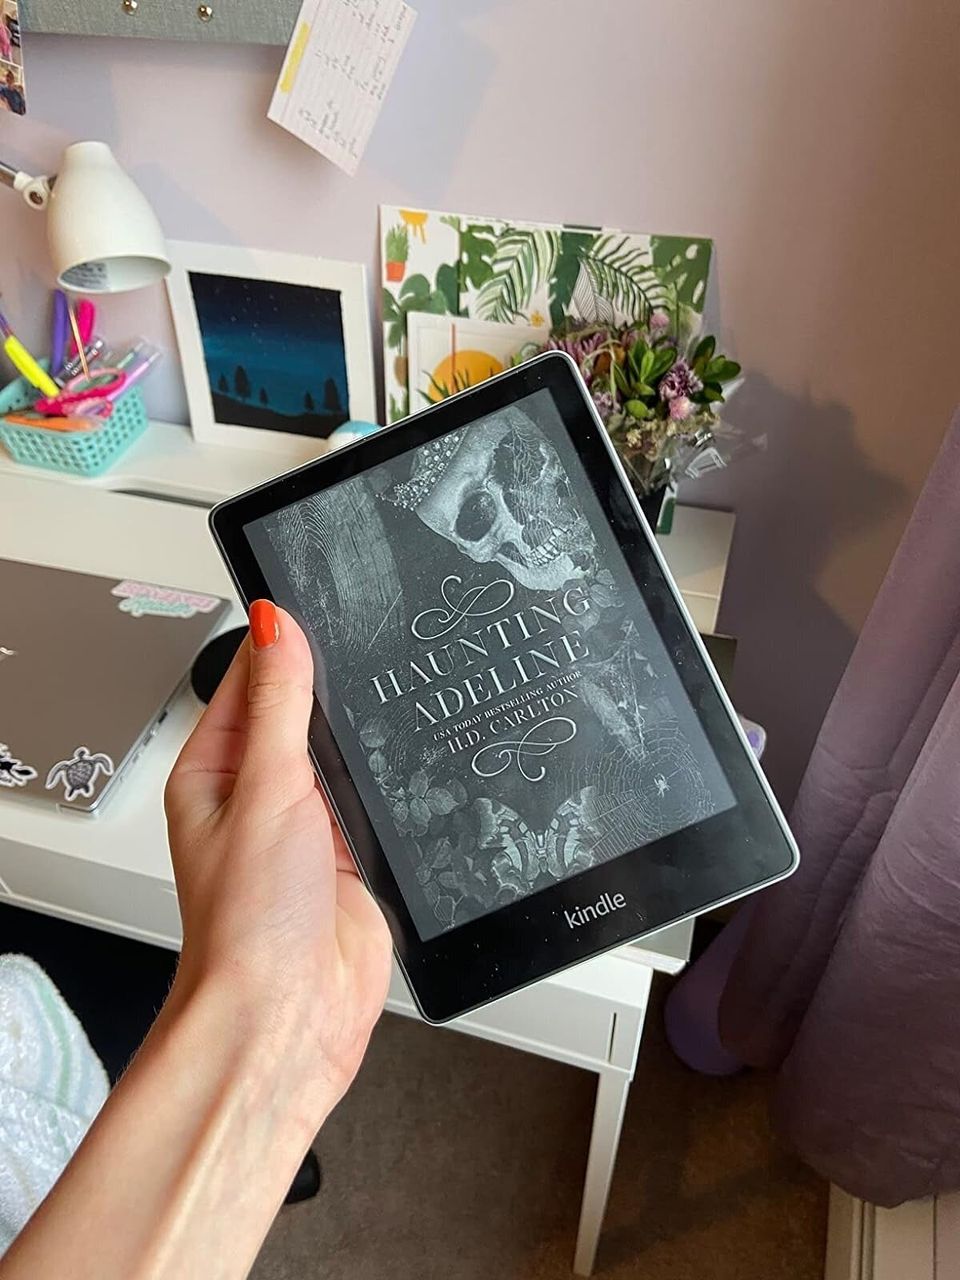 The newest version of the Kindle Paperwhite